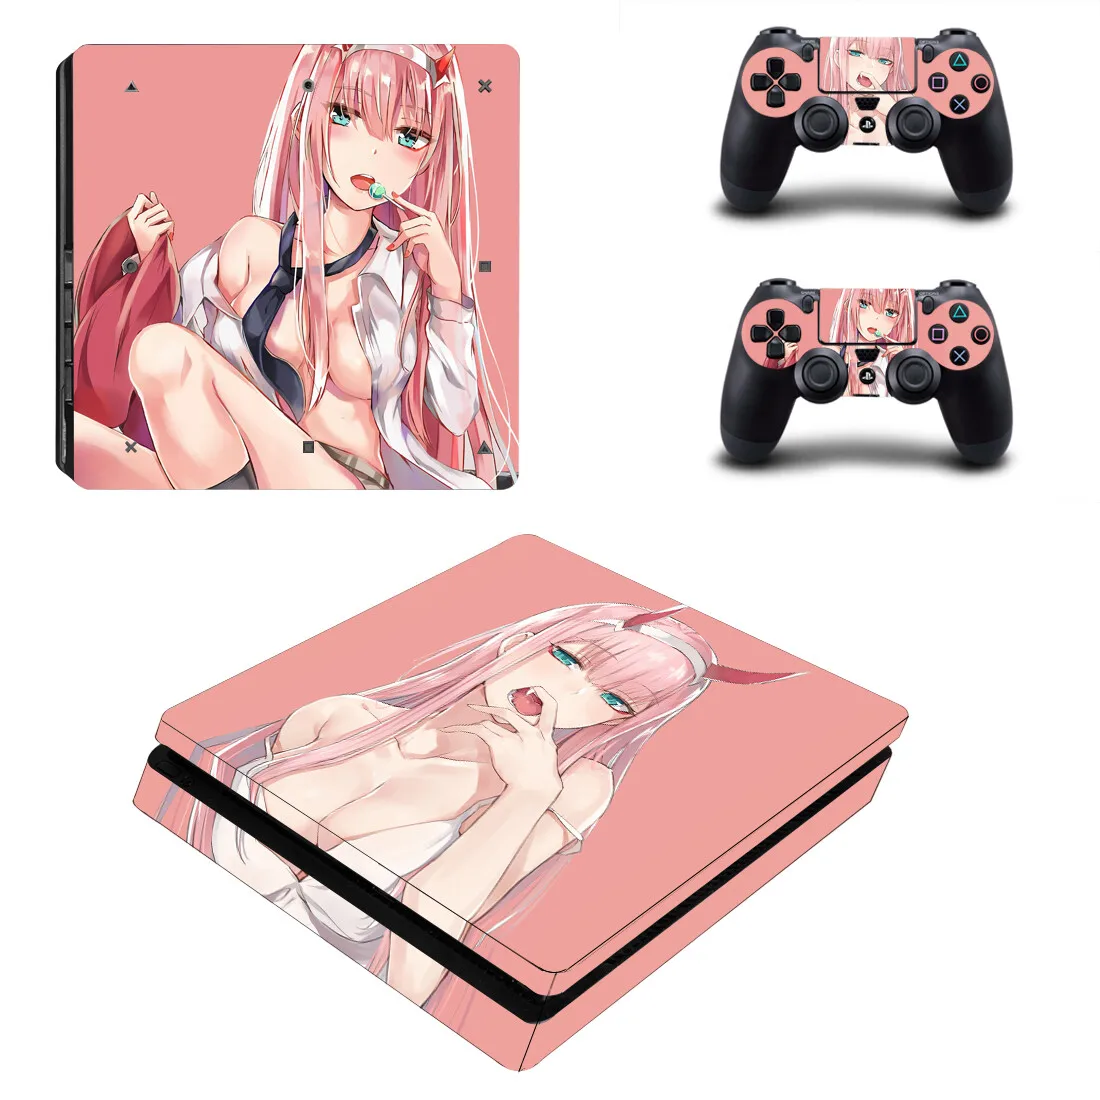 

Anime Cute Girl Zero Two PS4 Slim Skin Sticker For PlayStation 4 Console and Controllers Skins Sticker Decal Vinyl